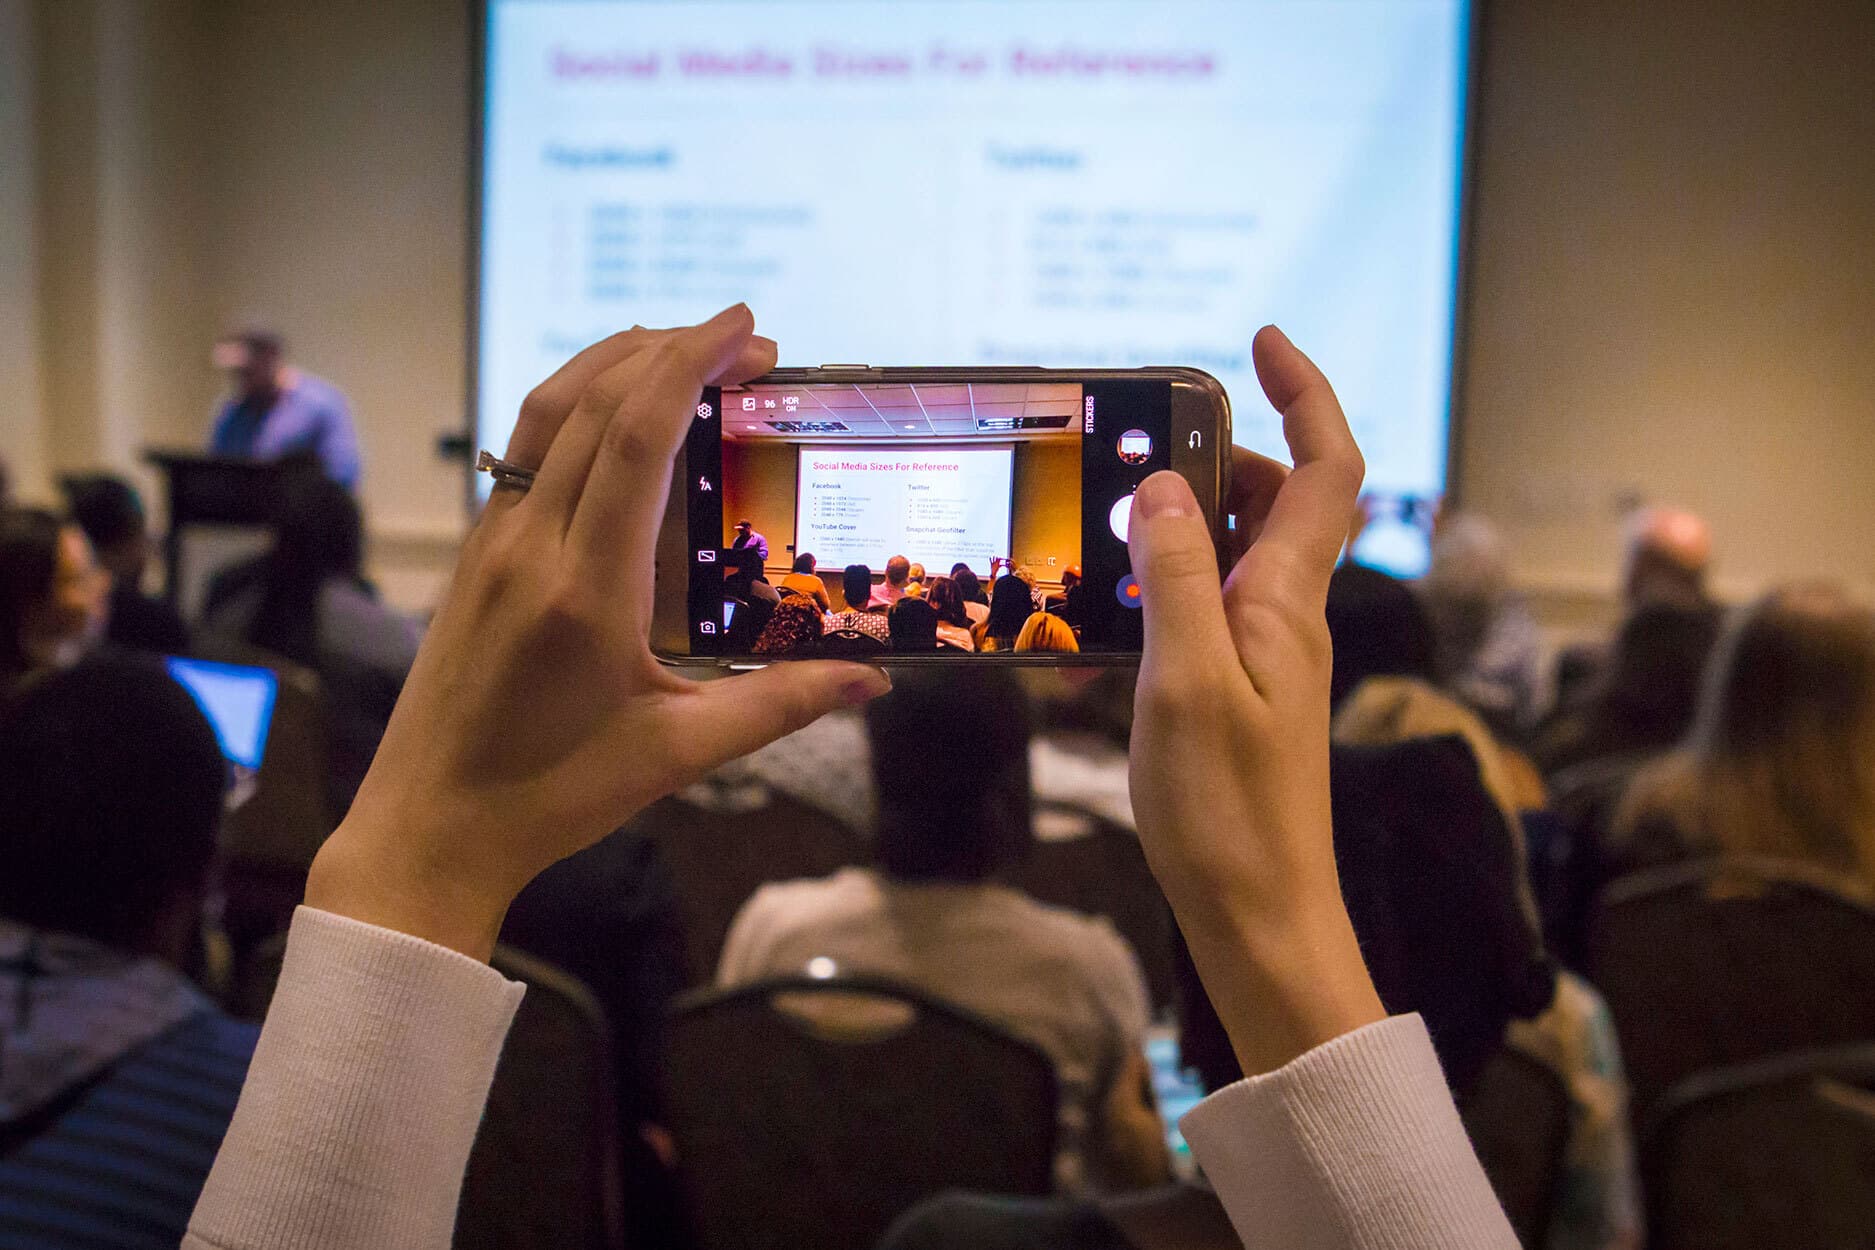 hands hold up a smartphone open to the camera app. the phone is pointed at the conferences main projection screen displaying a slide titled: Social media sizes for reference